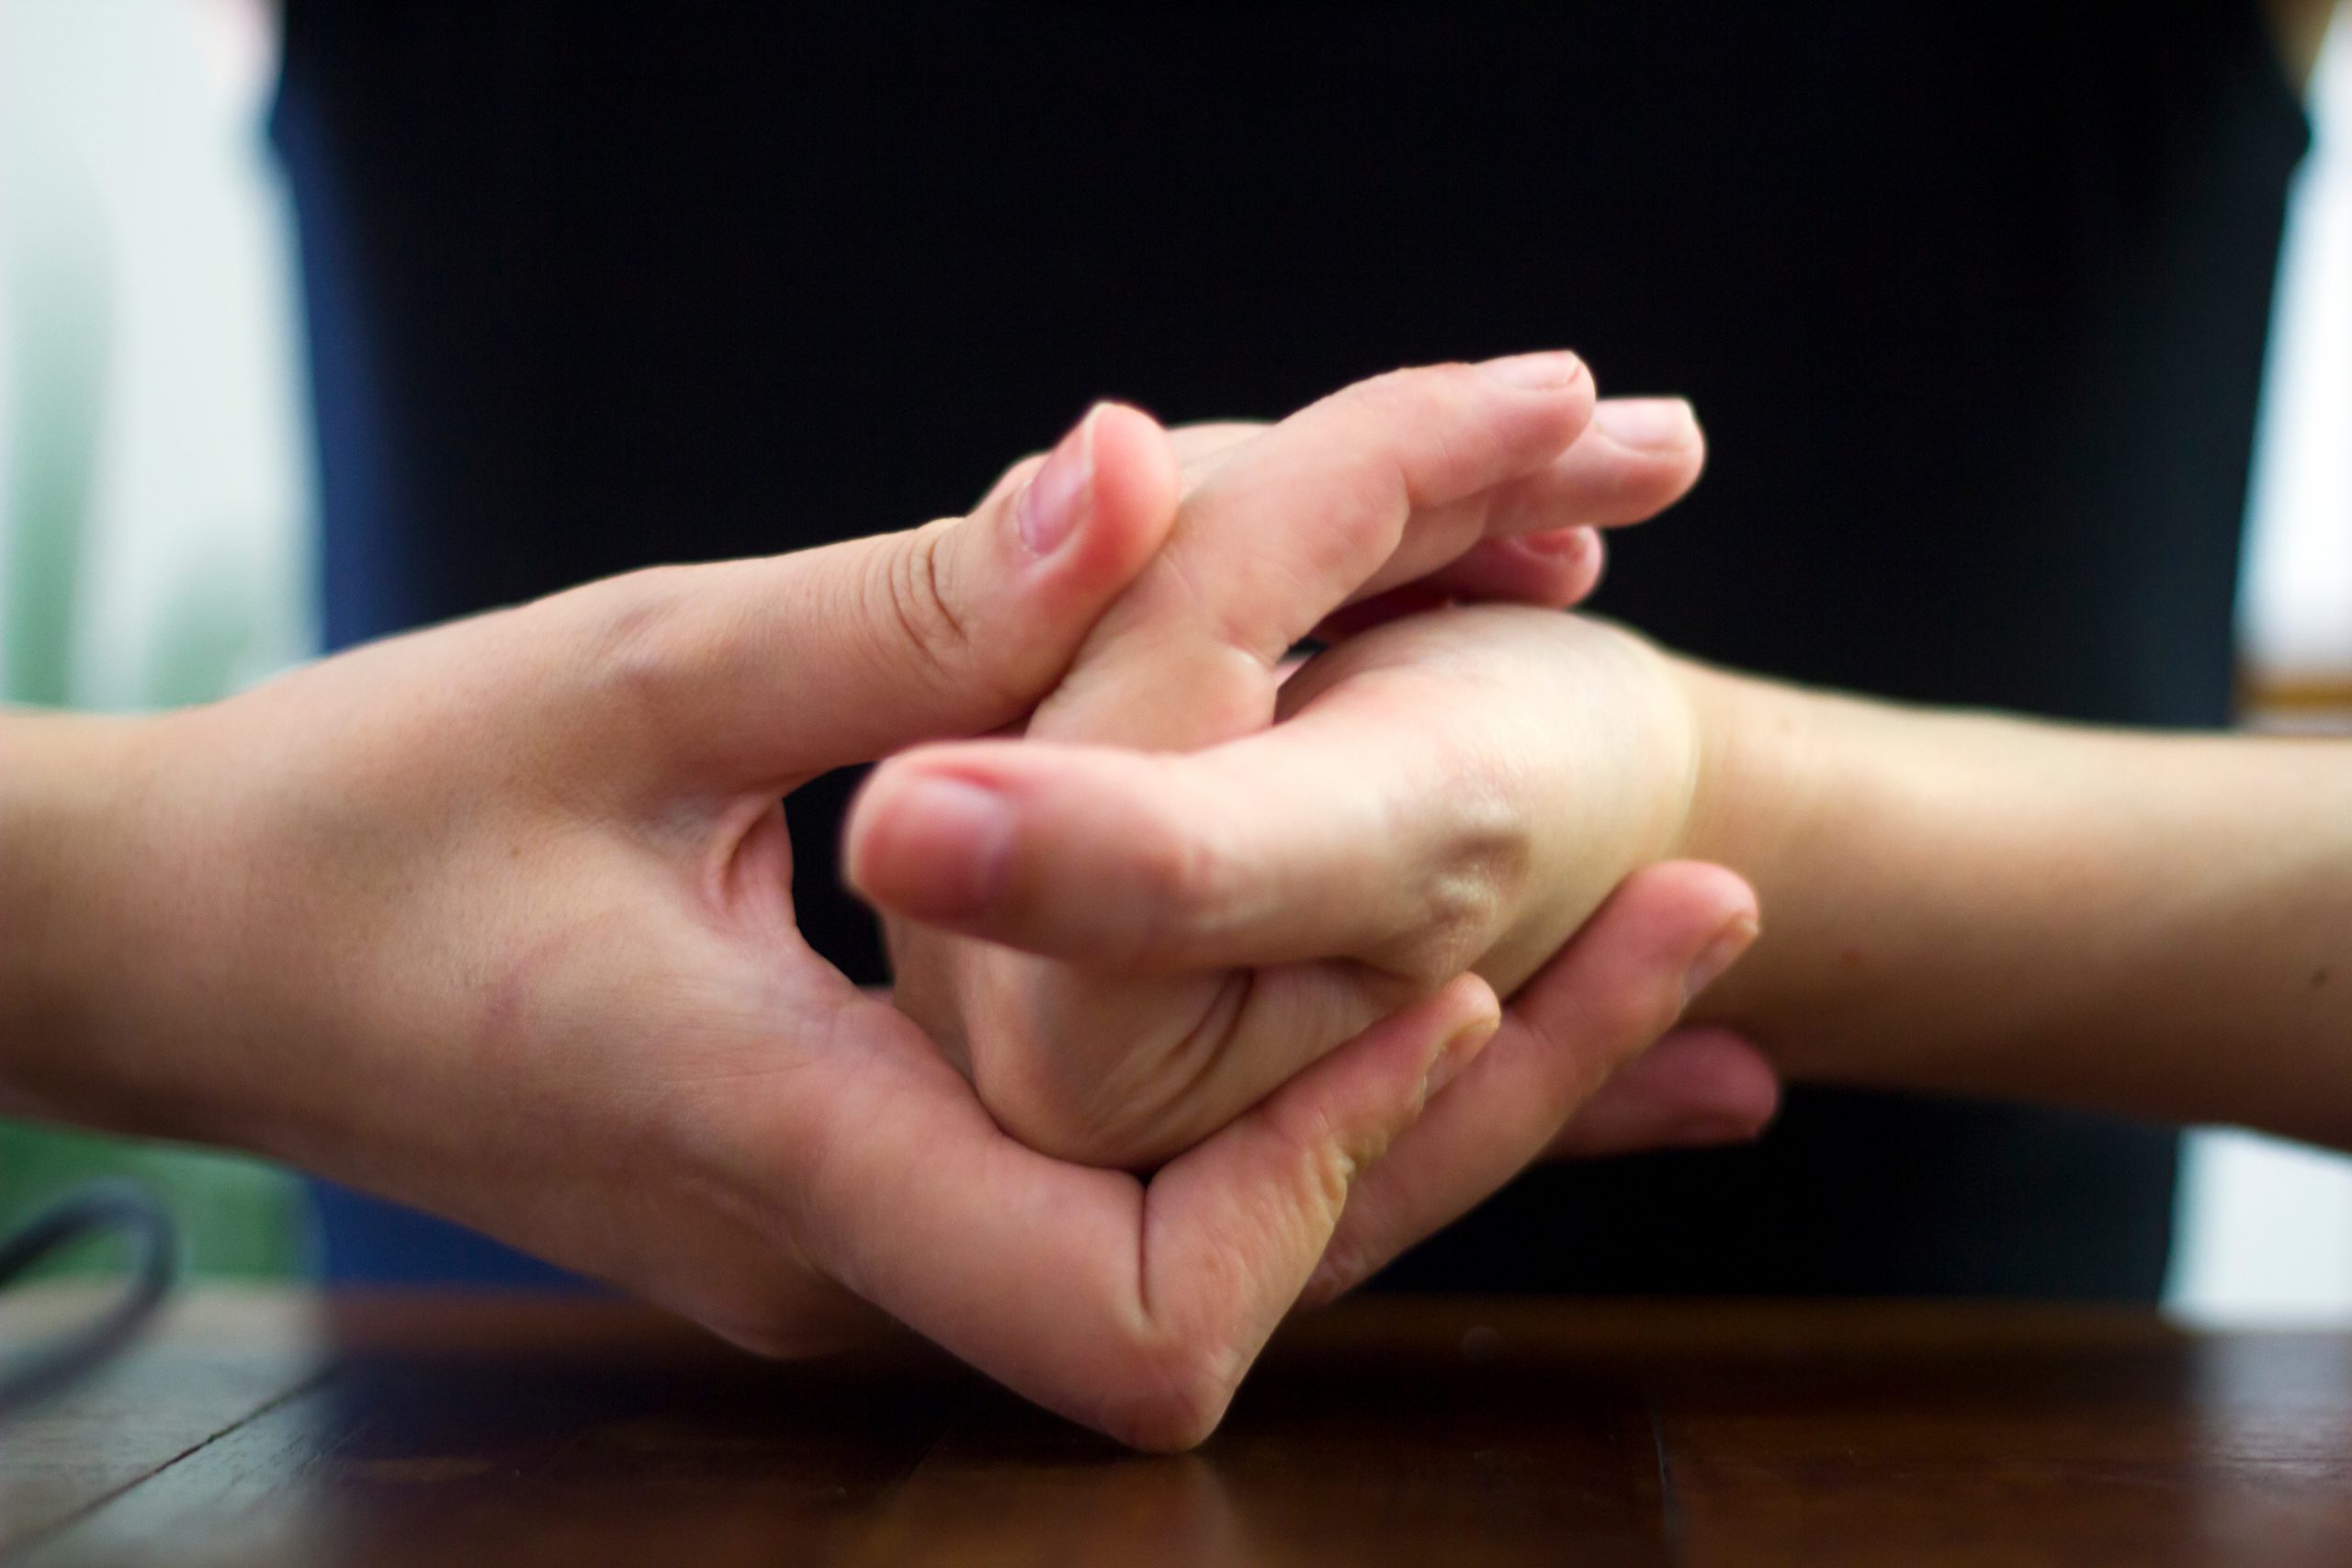 Cracking Your Knuckles Cause Arthritis? Healthcare of